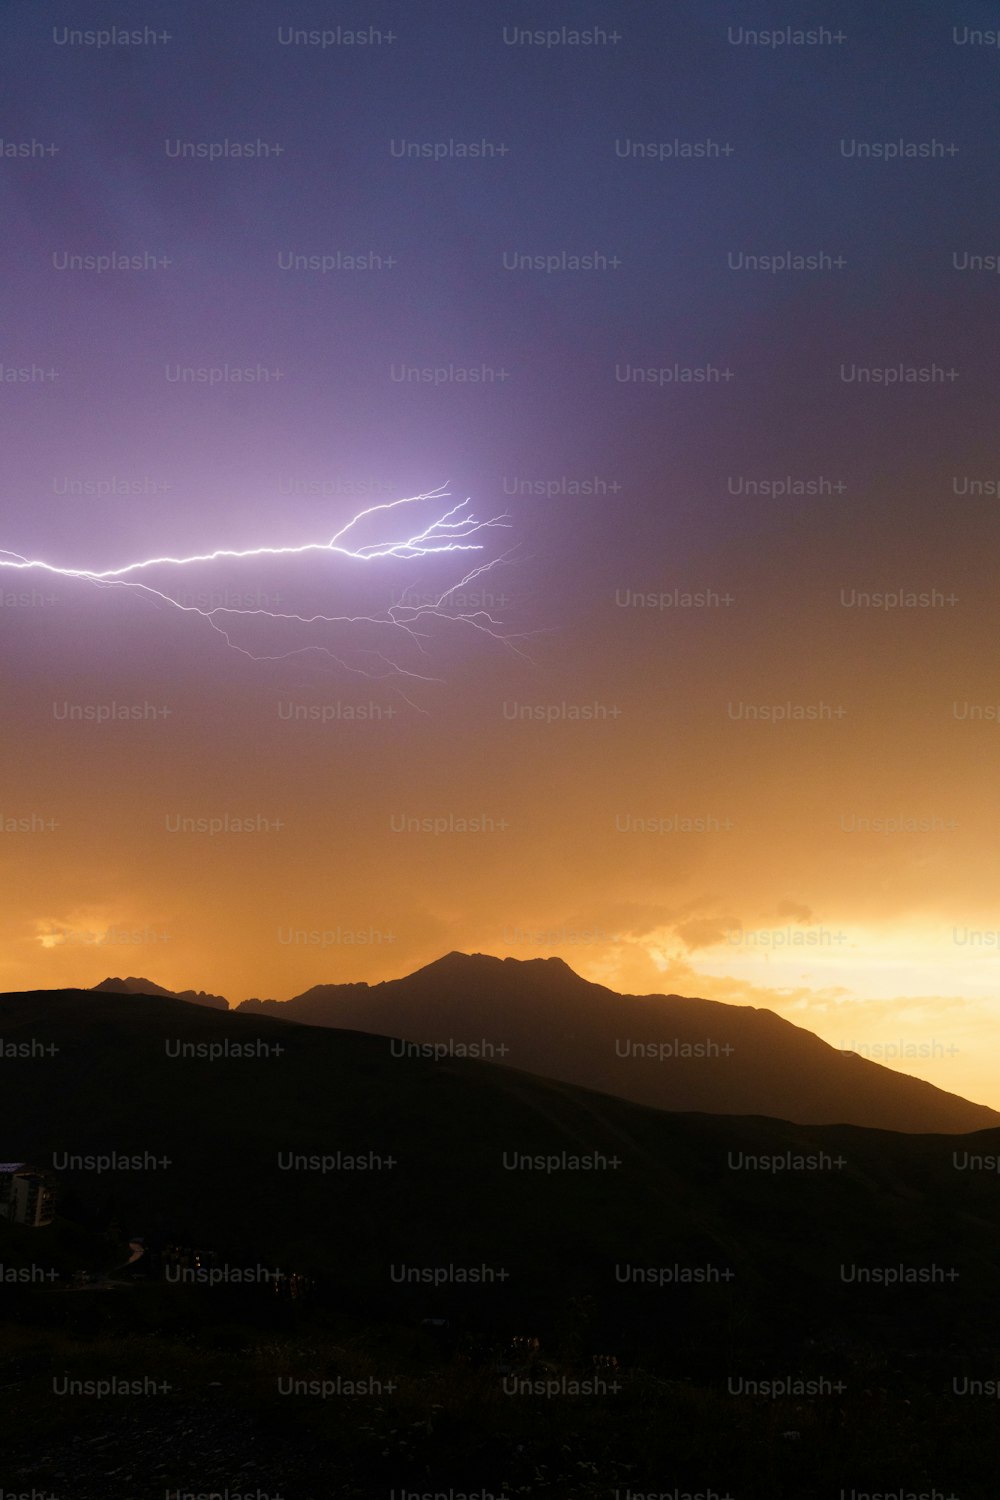 a lightning bolt is seen in the sky above a mountain